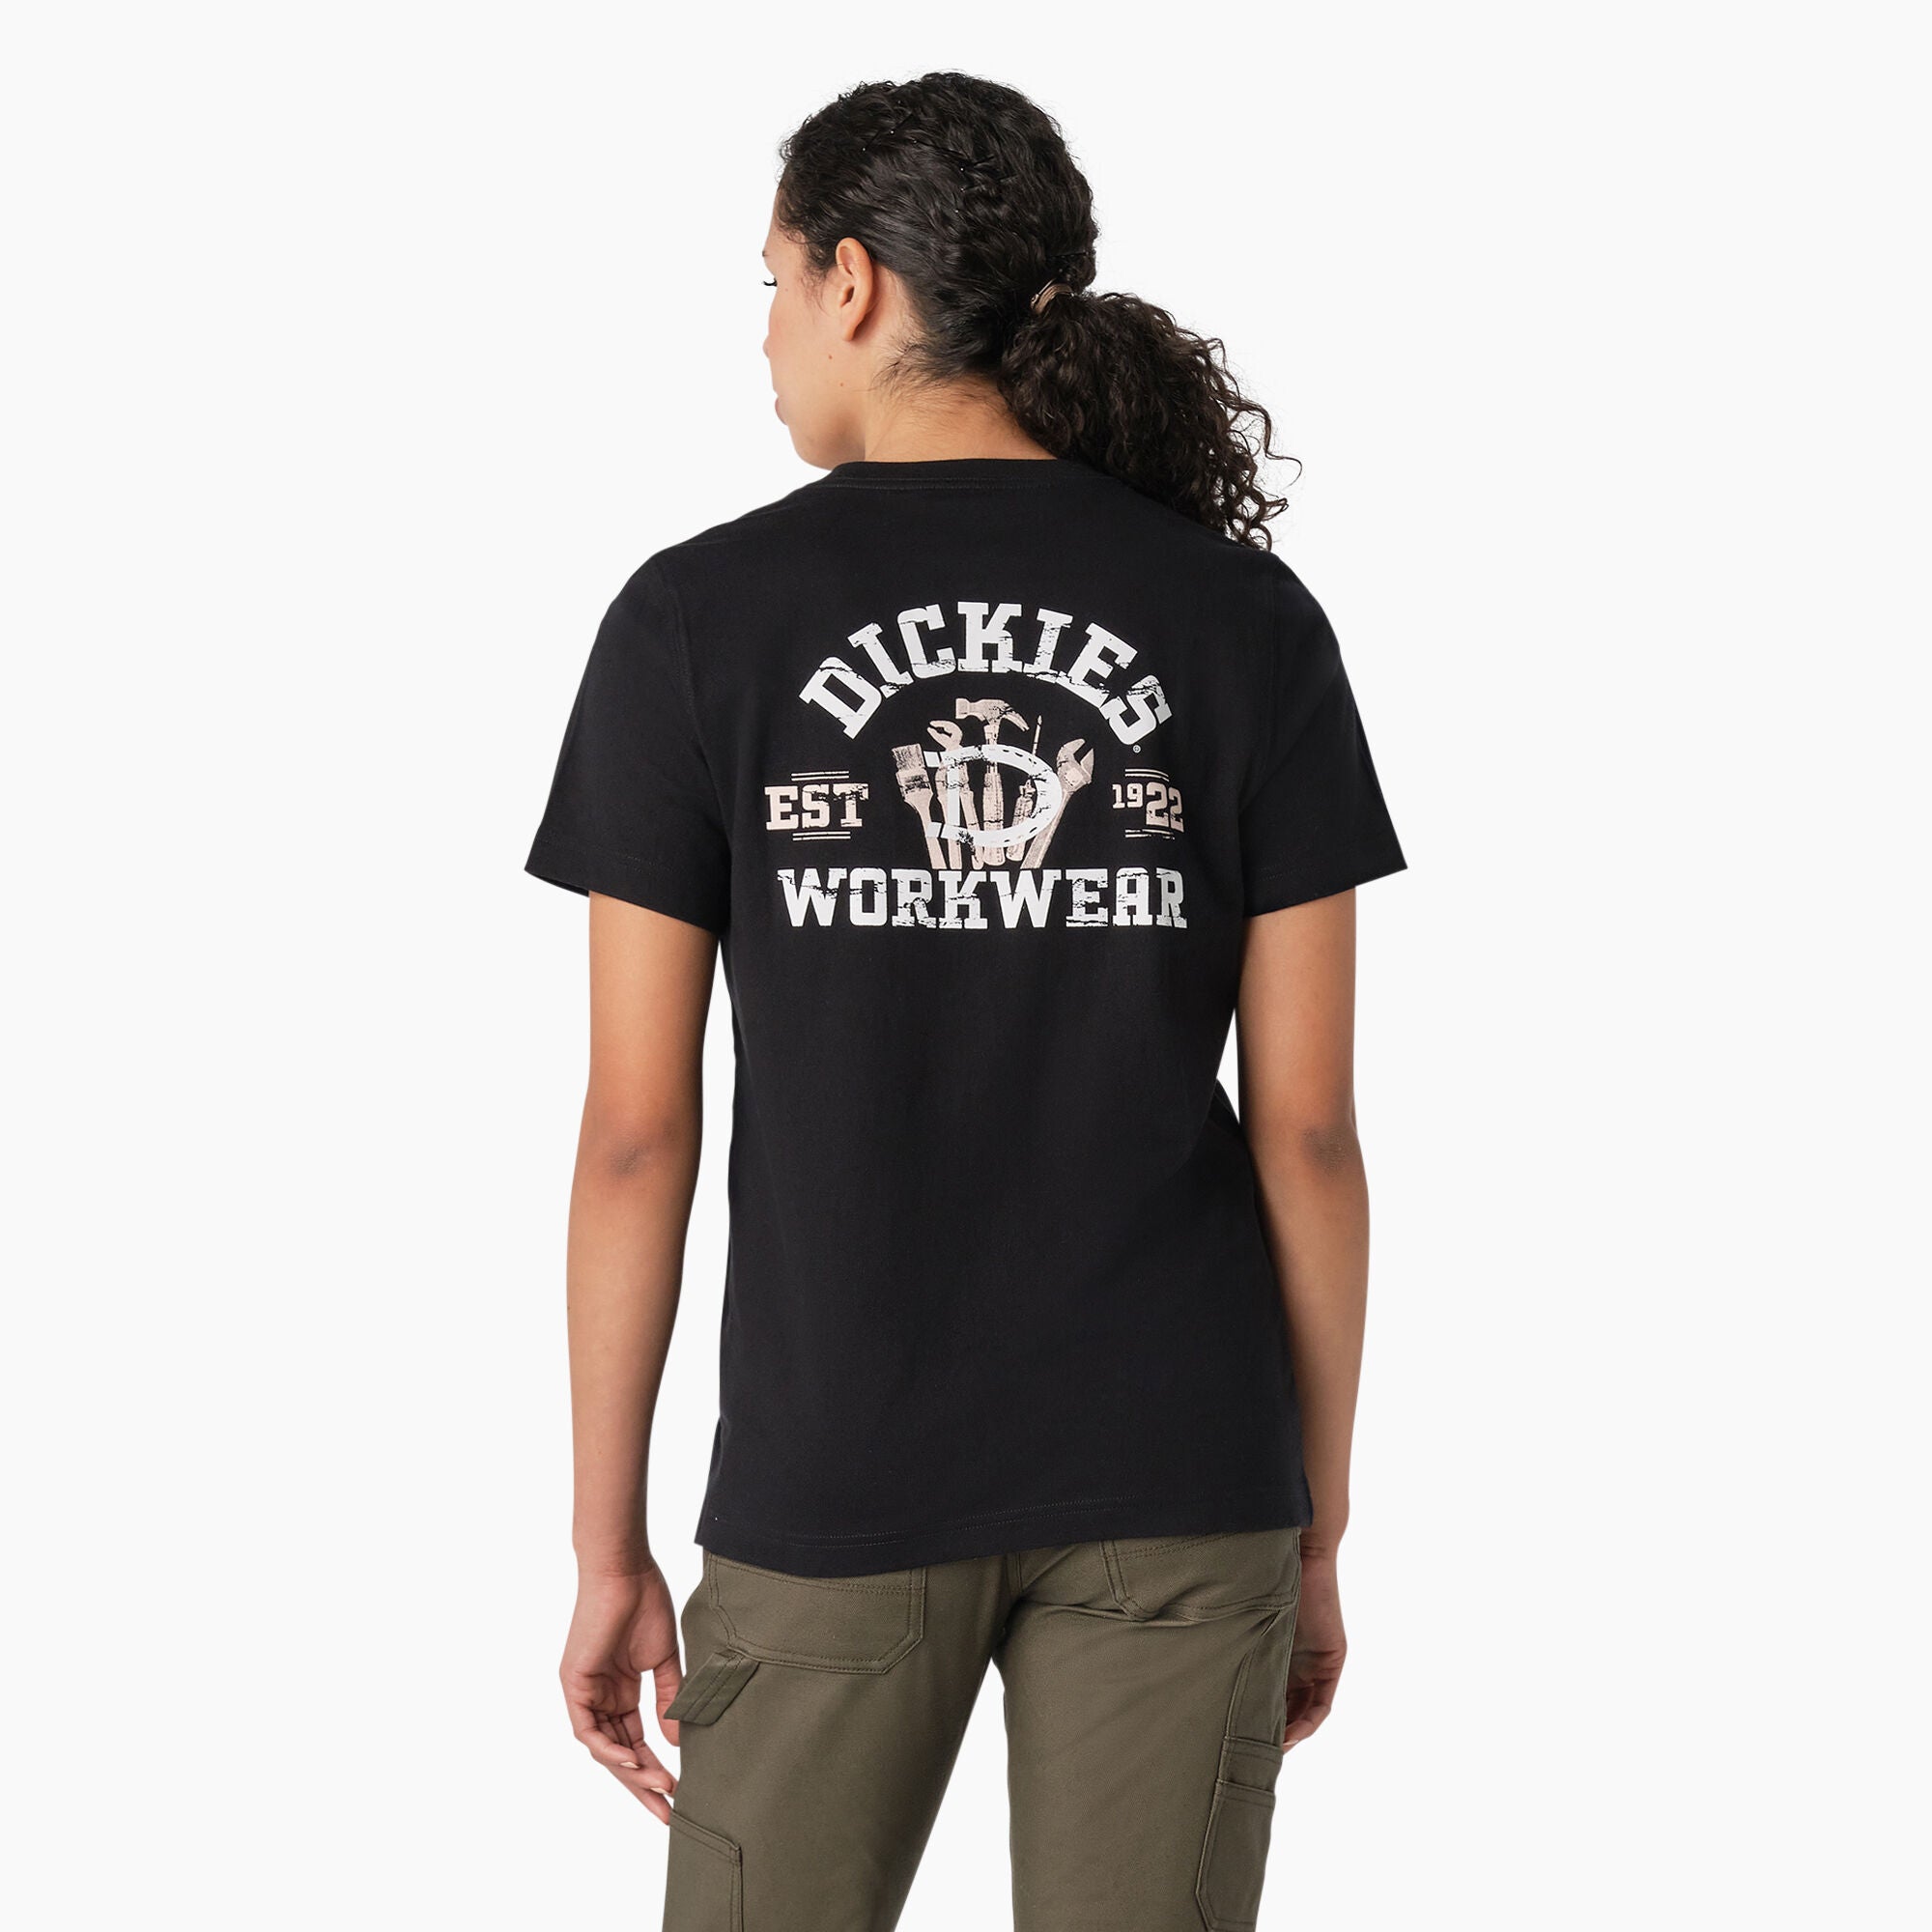 Dickies Women's "Dickies Workwear" Graphic Short Sleeve T-Shirt - Work World - Workwear, Work Boots, Safety Gear